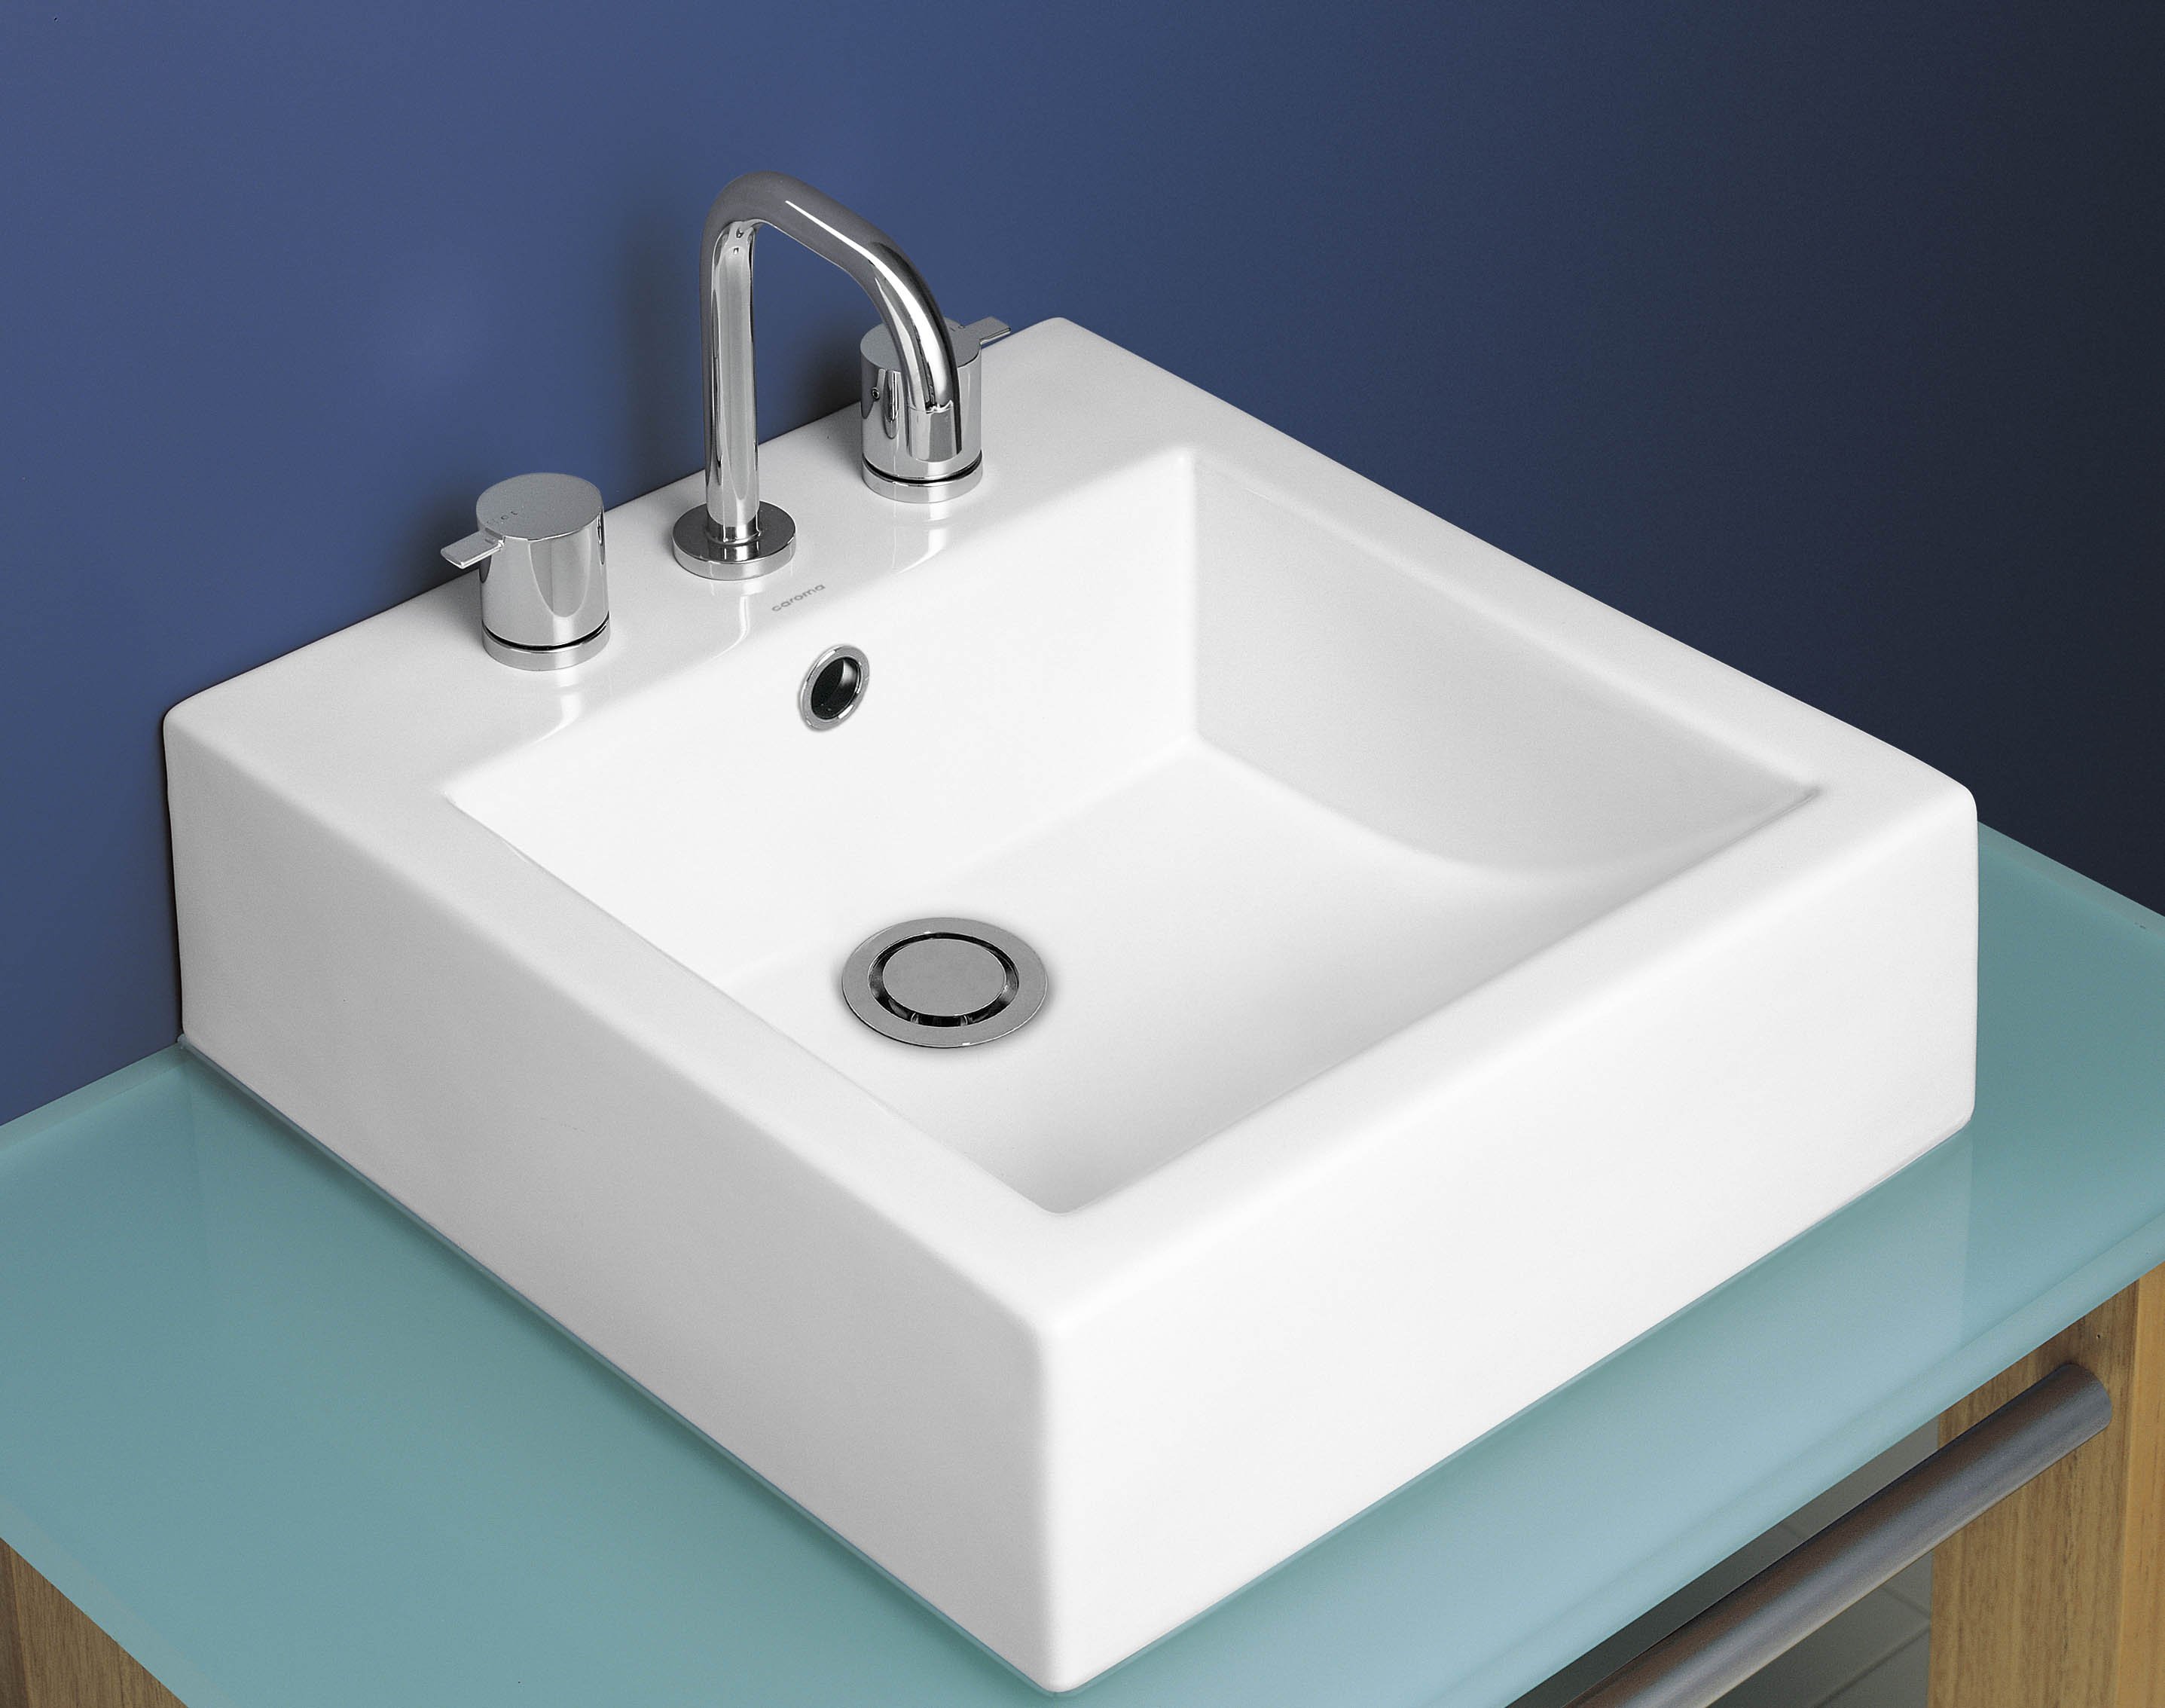 Liano sinks by Caroma